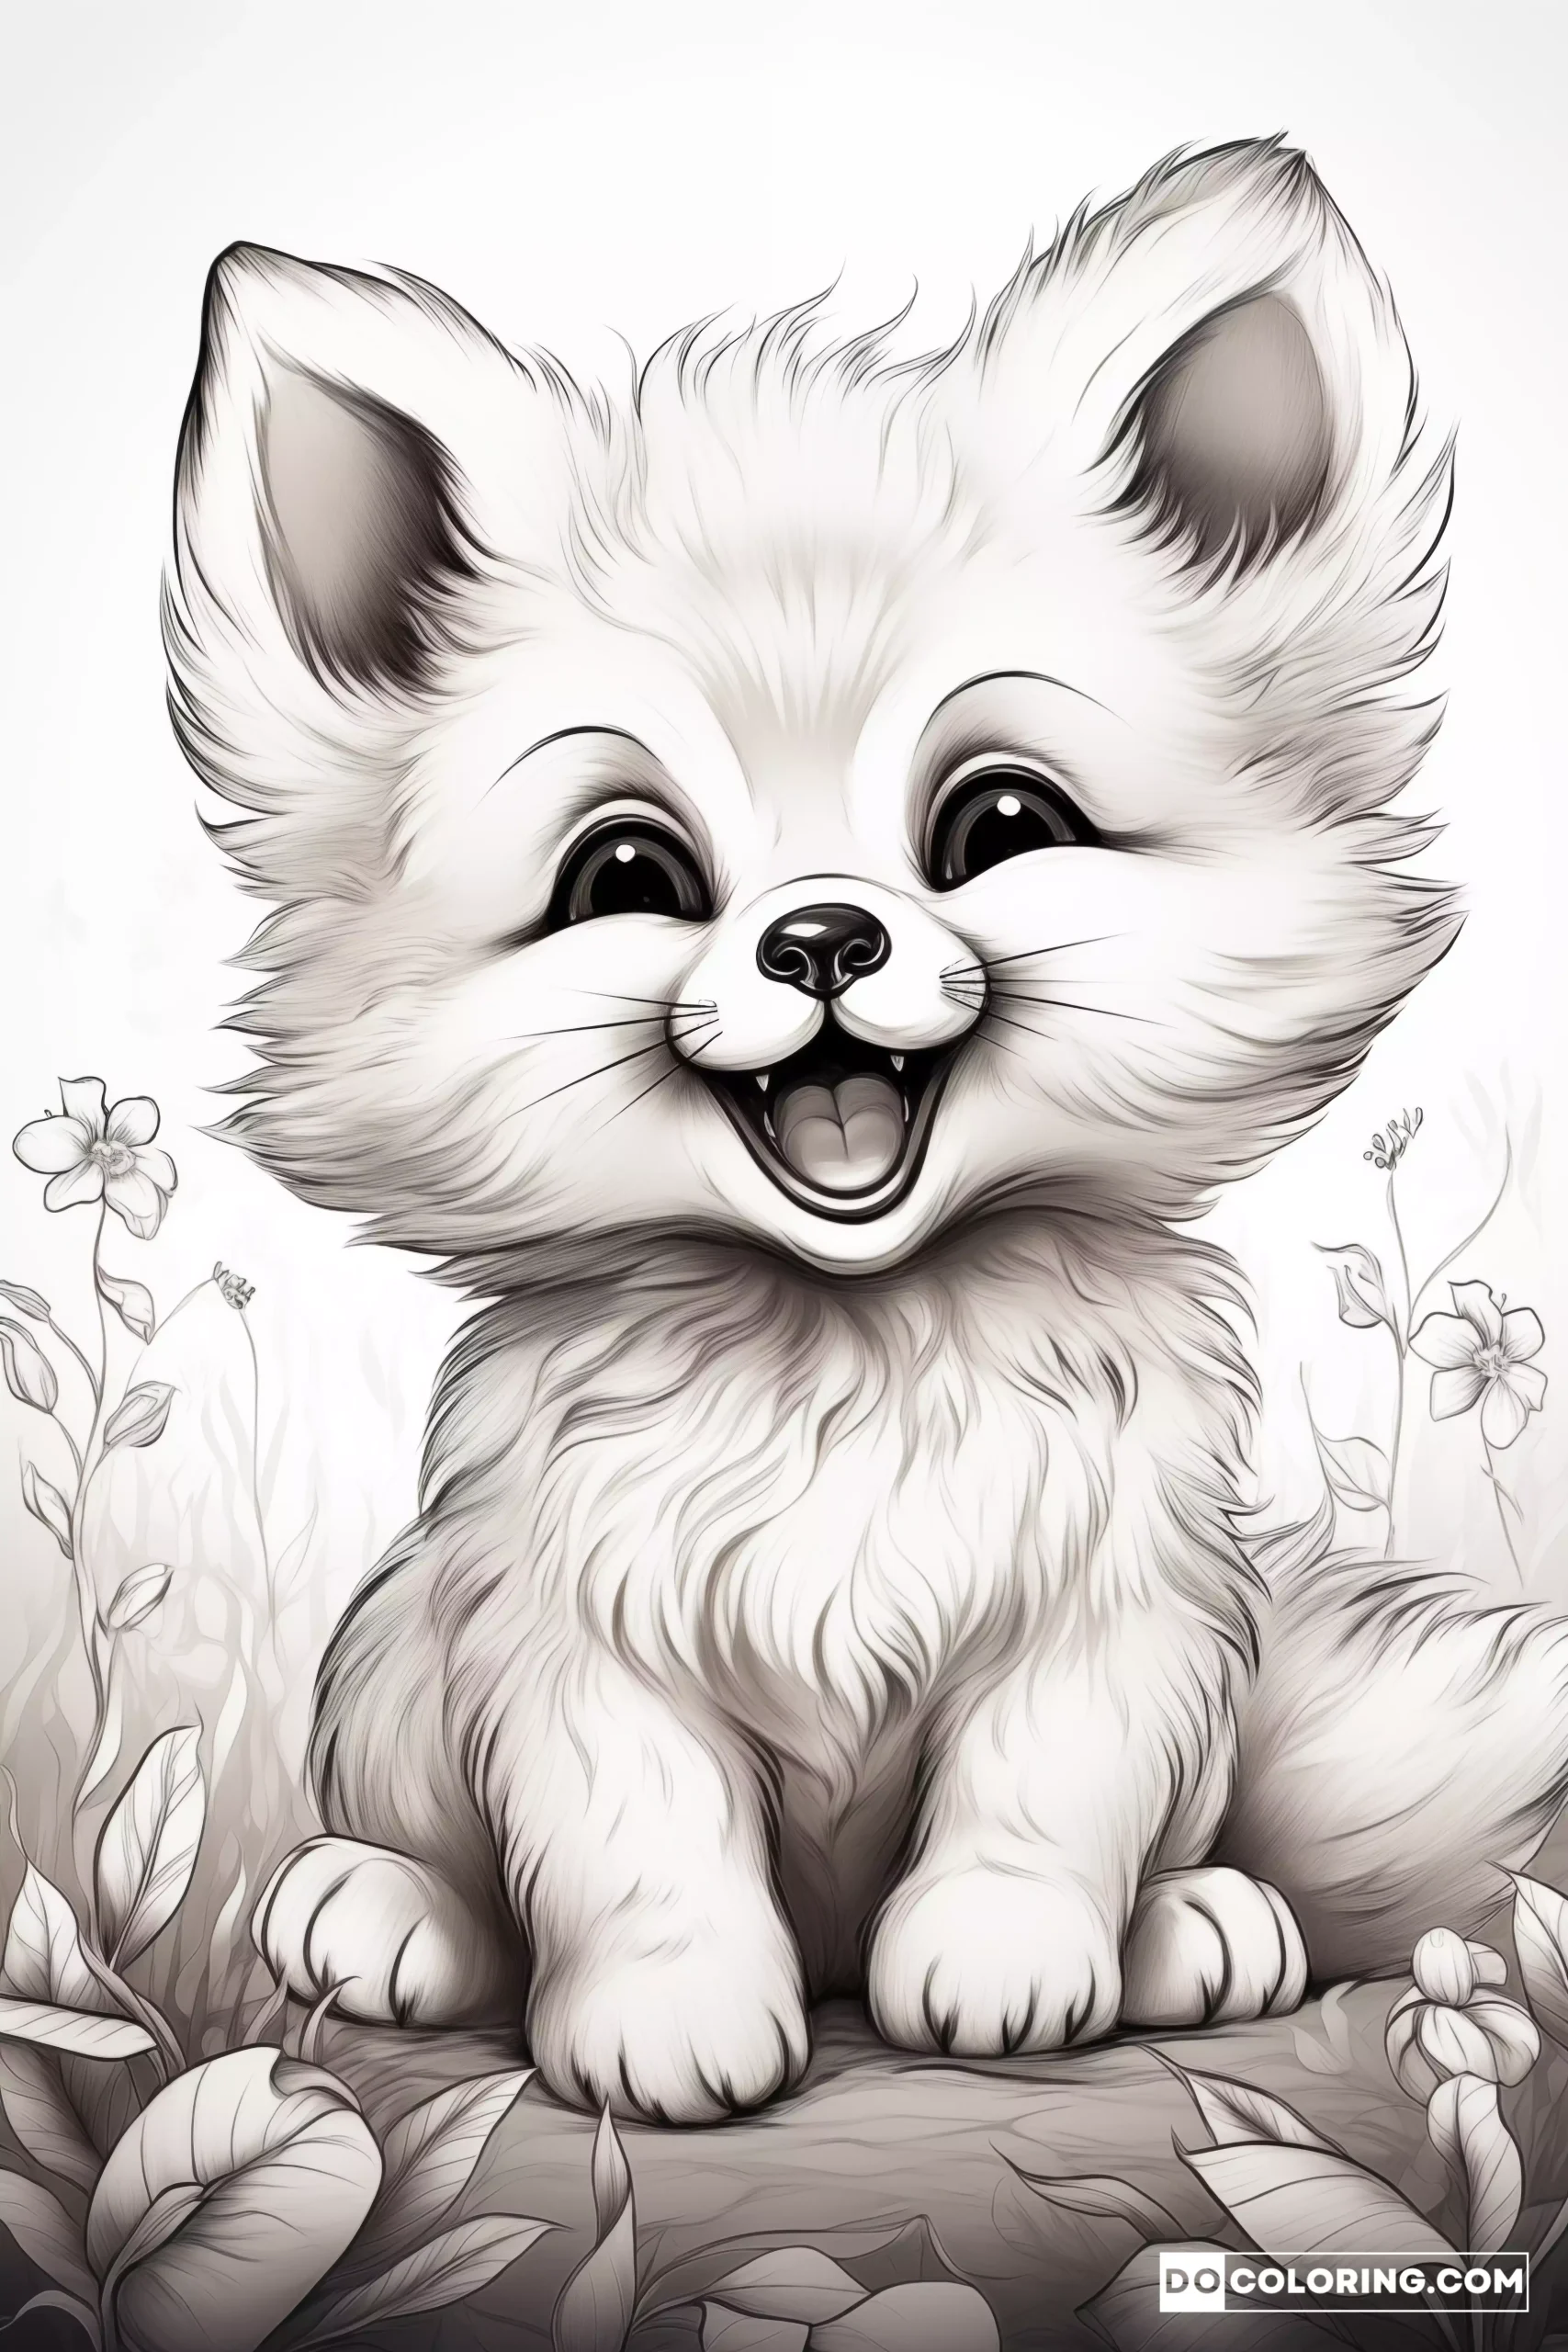 An intricately drawn baby fox with playful eyes and expressive features, coloring page for adults.